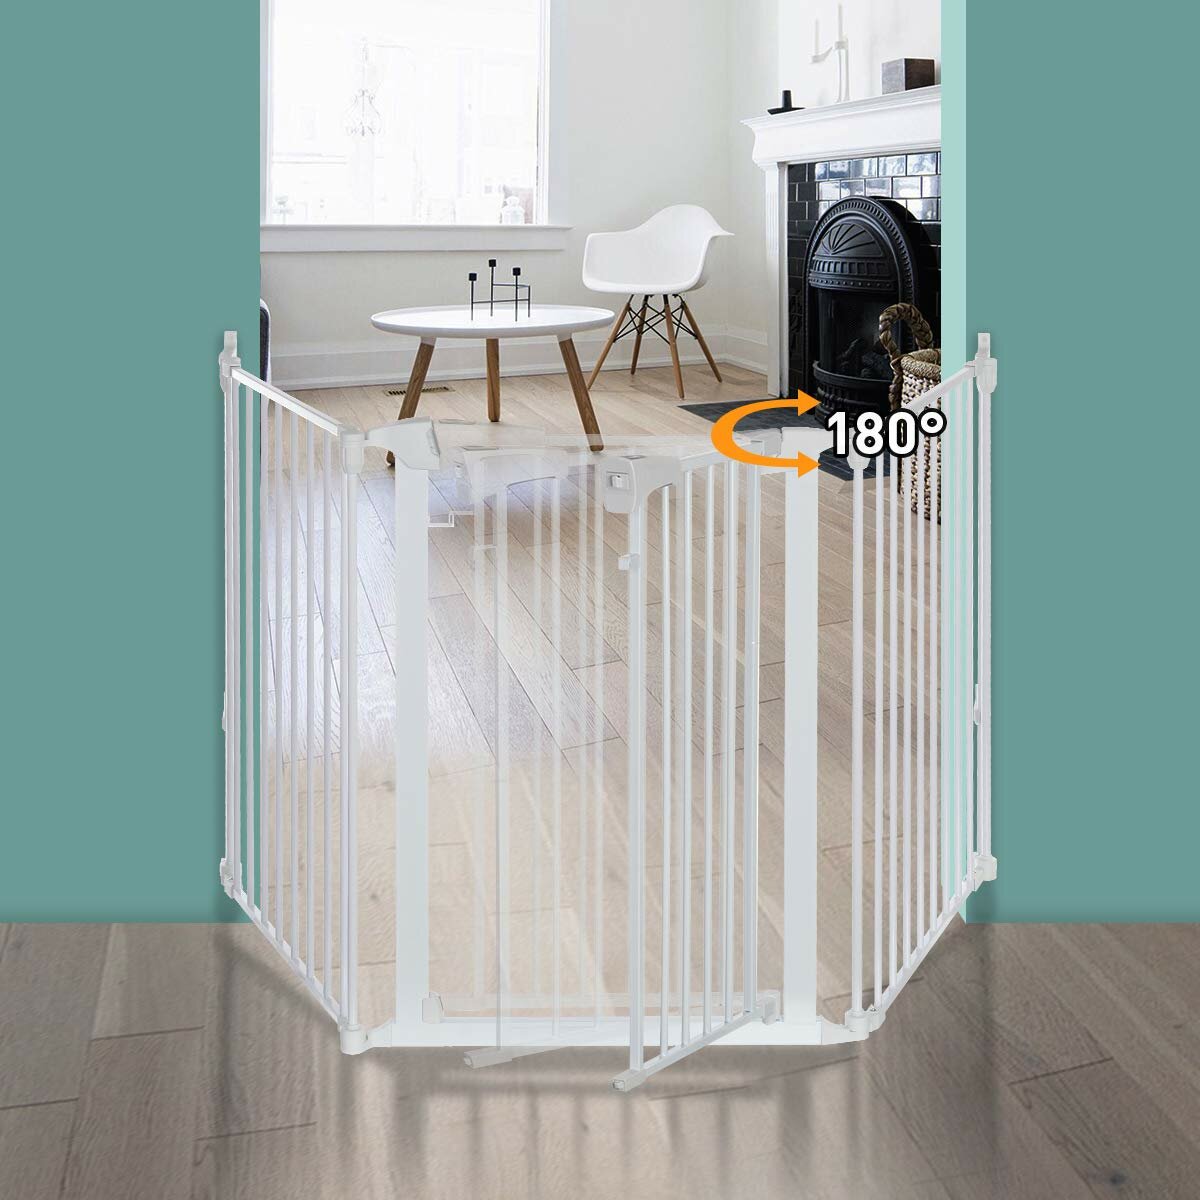 Image of KINGSO White/Black Adjustable Auto Close Metal Baby Gate with Swing Door For Doorway Stairs